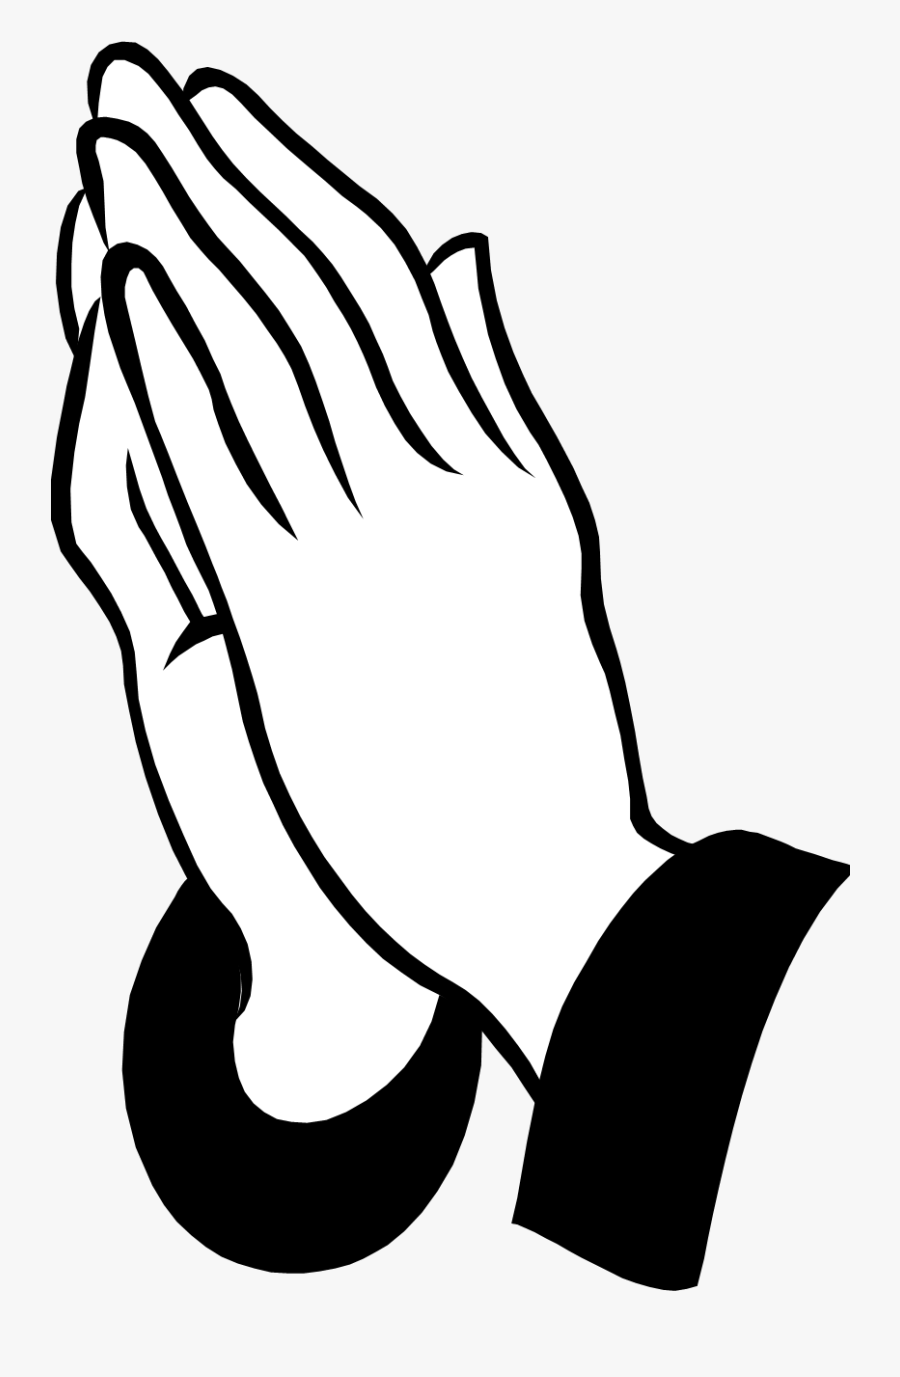 Pray Clipart Prayer Request - Praying Hands Black And White, Transparent Clipart